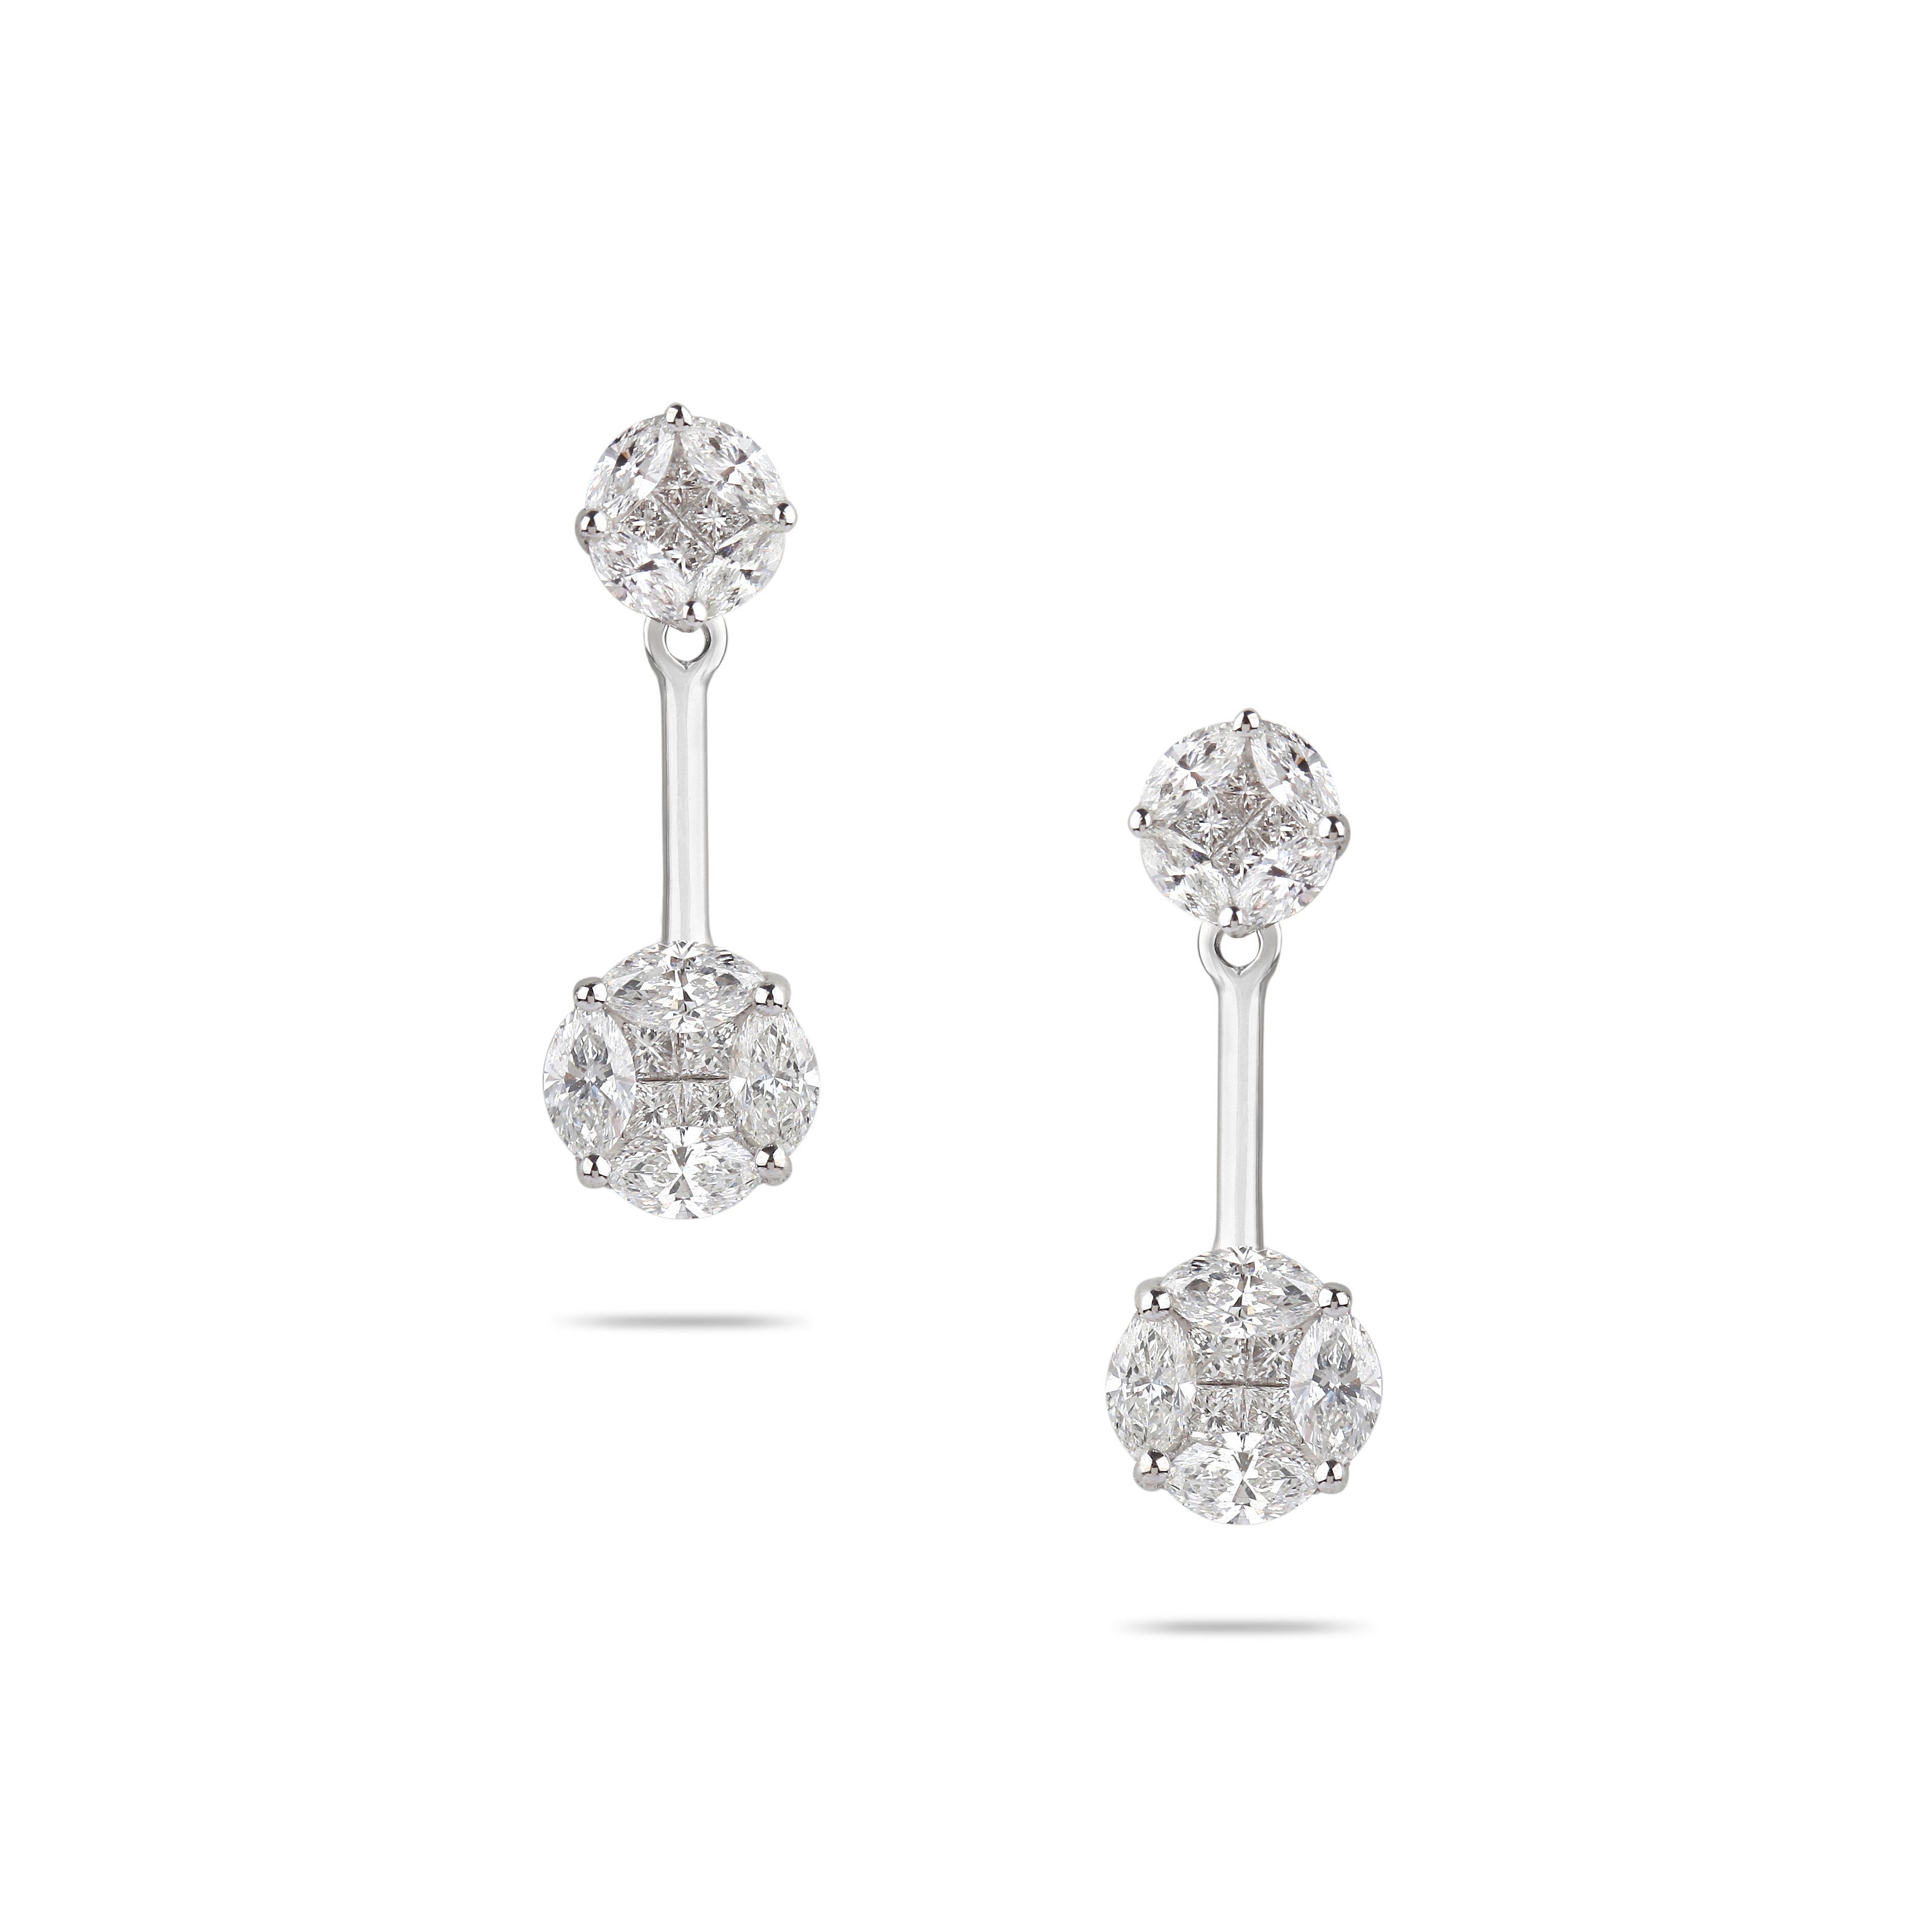 Attachable Illusion Diamond Stud Earrings | Jewelry online